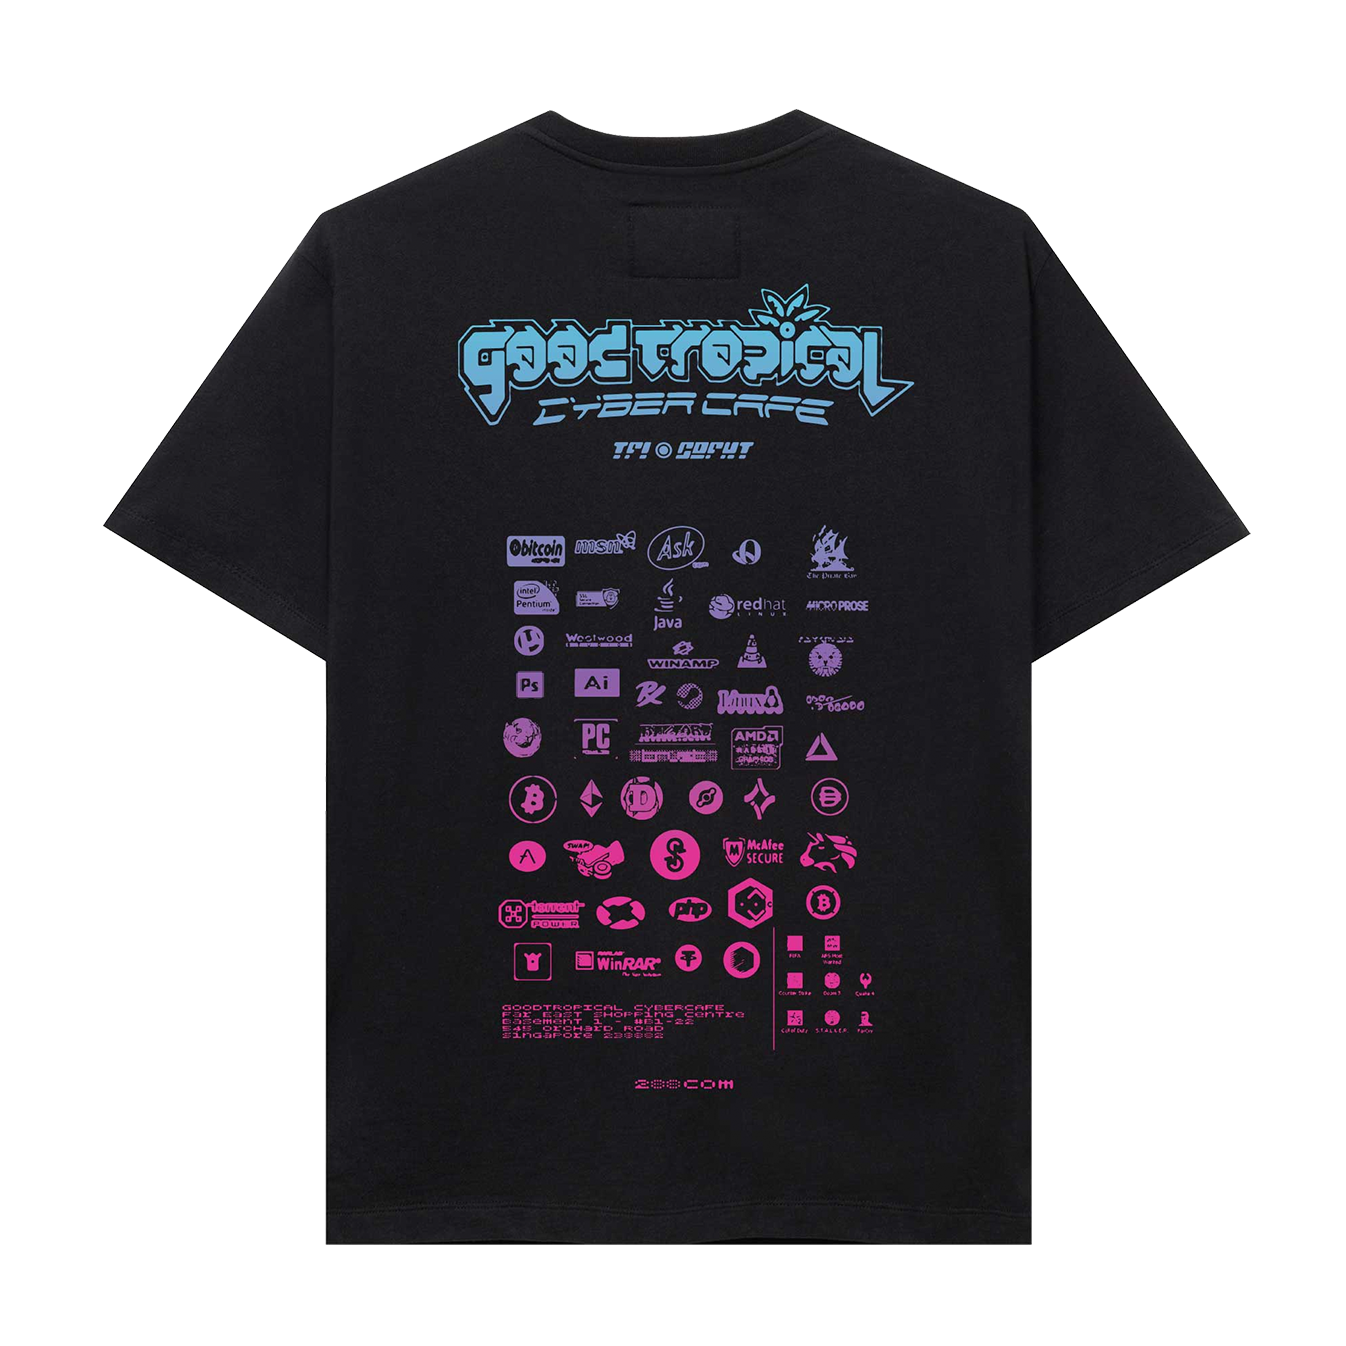 Goodfight x Tropical Futures Cyber Cafe Sponsor Tee Black